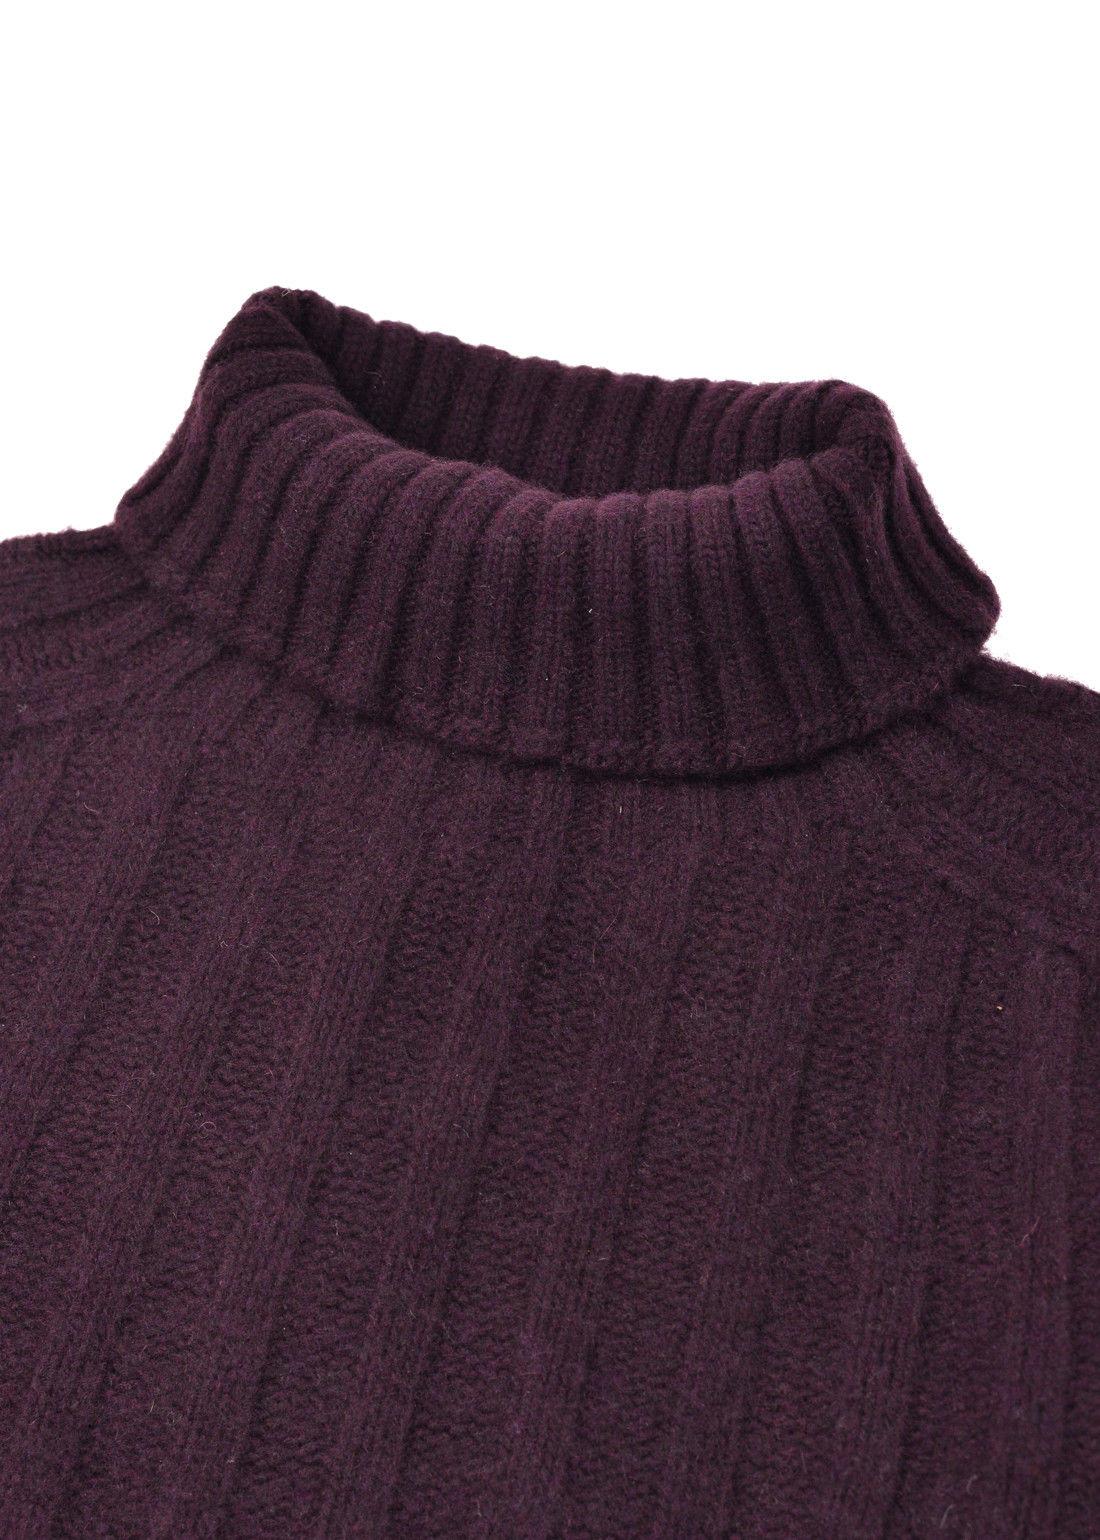 Tom Ford's luxurious turtle neck sweater with a rib knit woven design. This classic Tom Ford turtleneck sweater is crafted from soft cashmere for a gentle and luxurious feel to the skin. Perfect for this winter and fall season, pair with regular